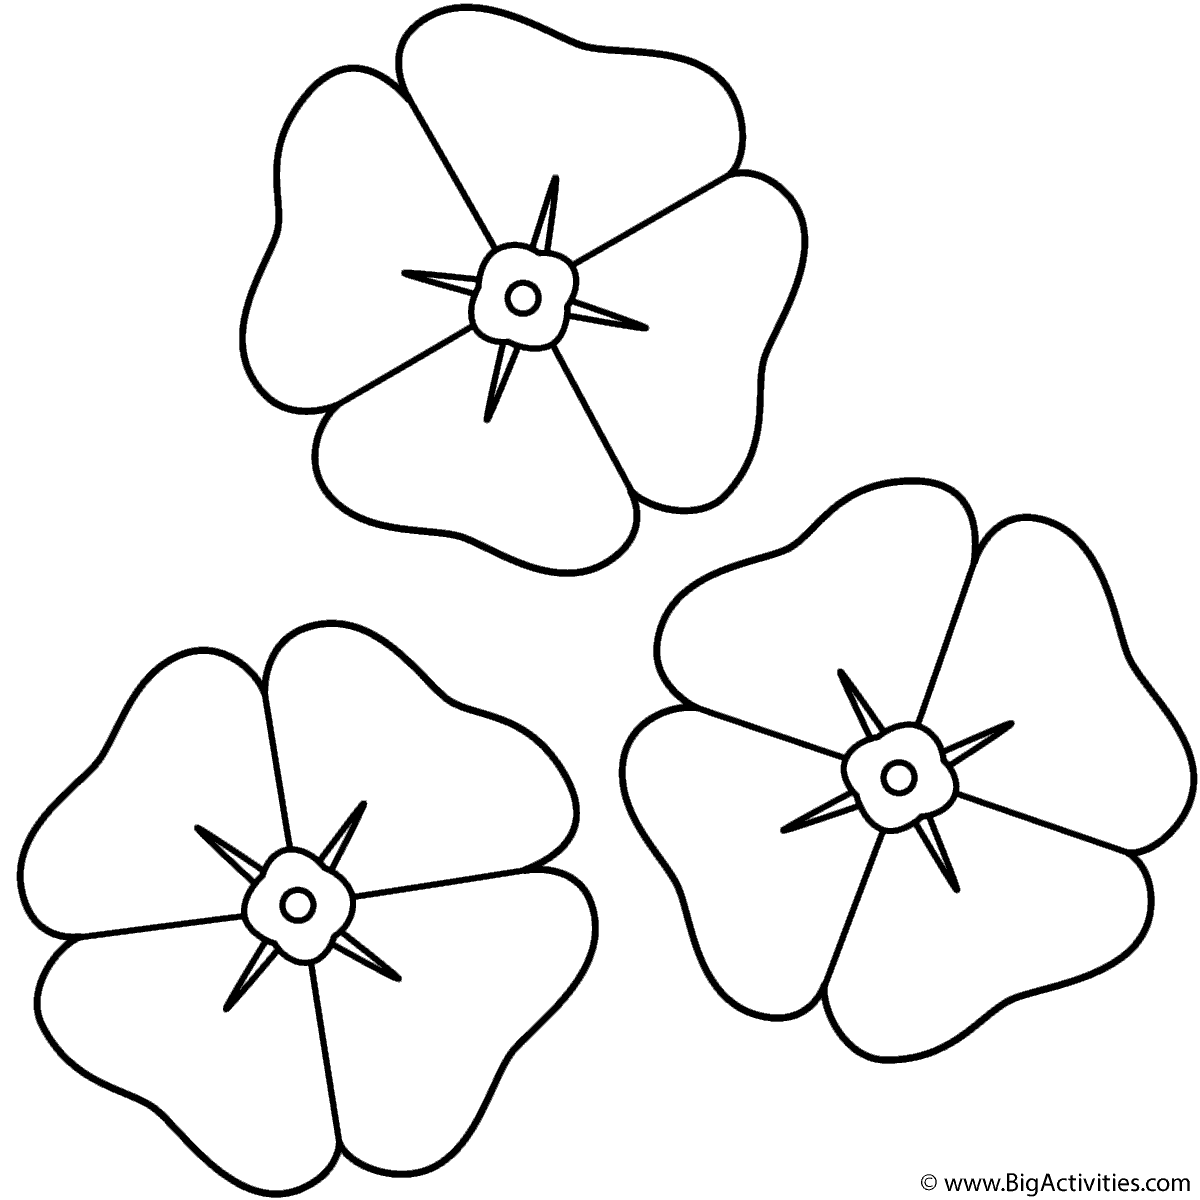 Poppies - Coloring Page (Anzac Day)